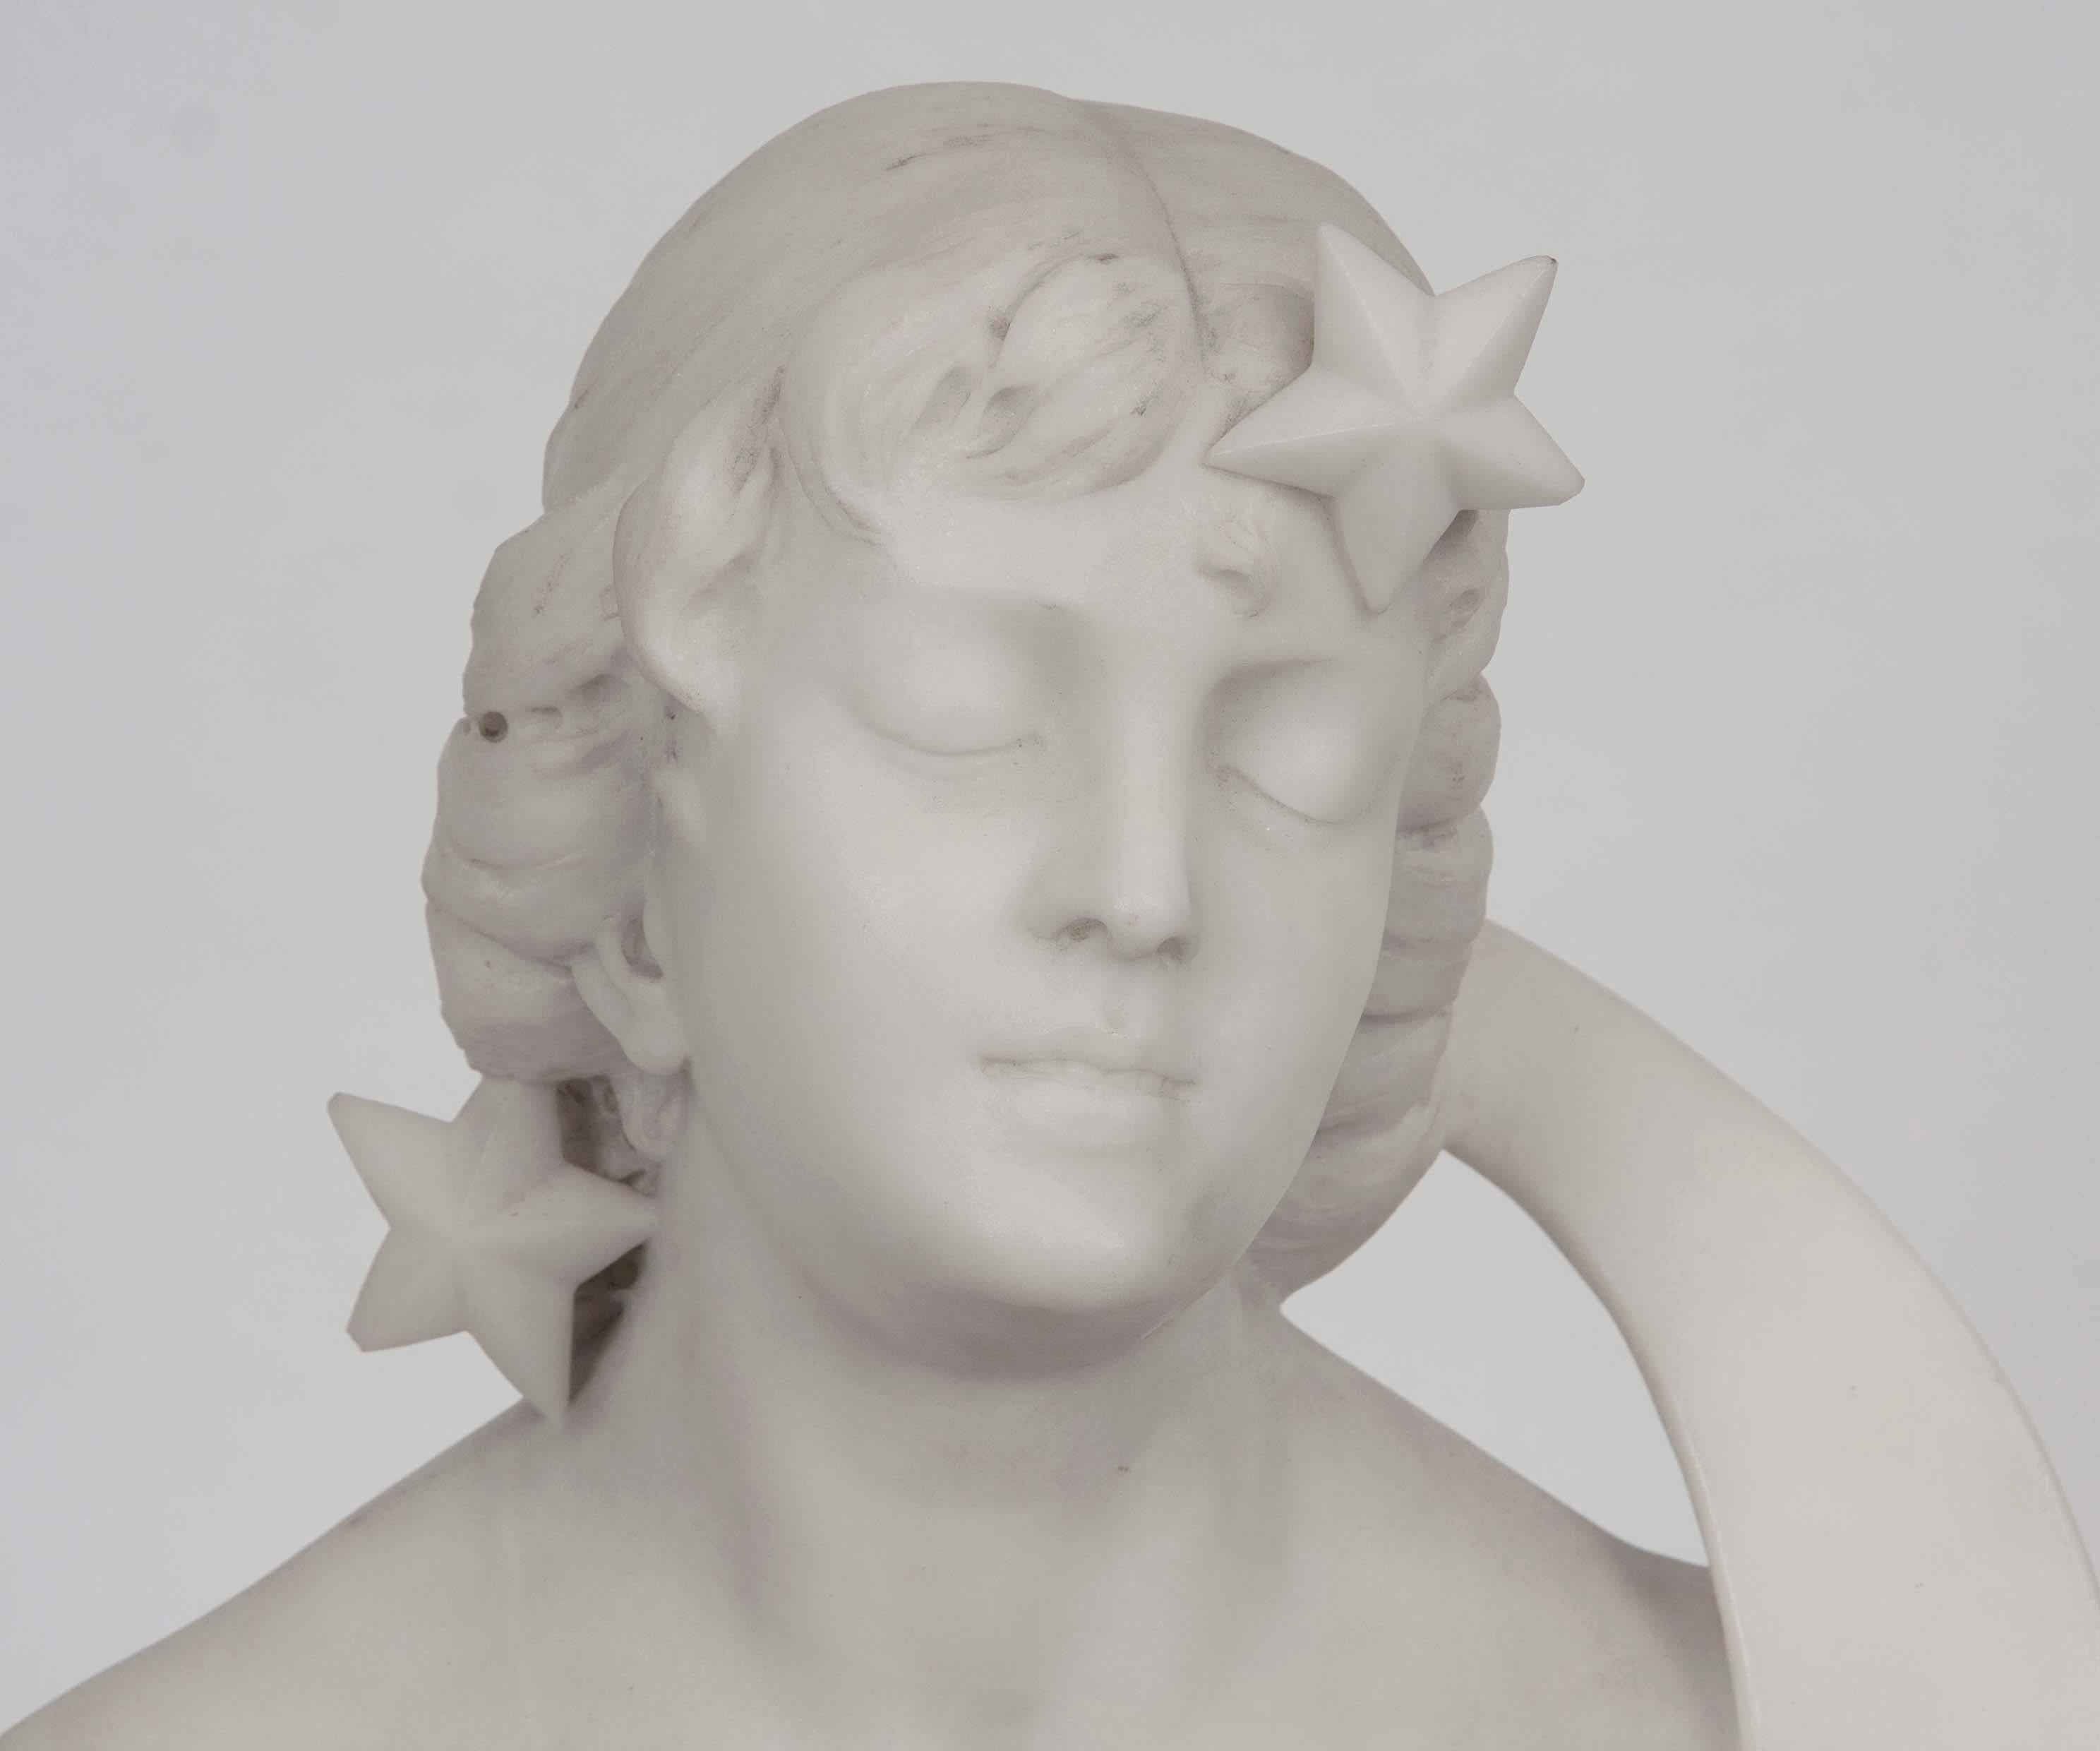 White marble bust of woman with shooting stars,
Italy, 19th century.
Dimension: 19 in. height (48.3cm).